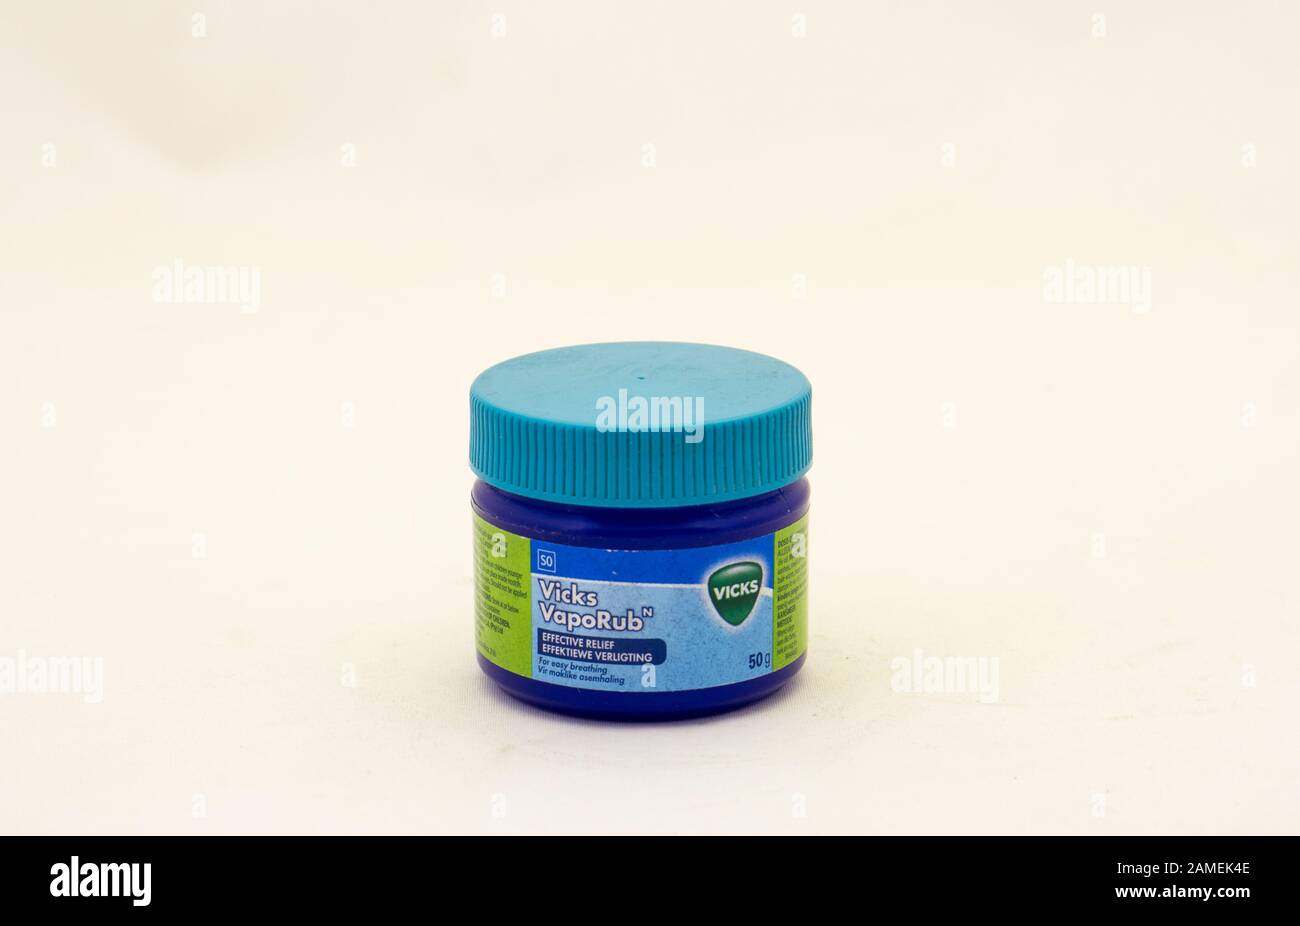 Alberton, South Africa - a tub of Vicks Vaporub ointment isolated on a clear background image in horizontal format with copy space Stock Photo